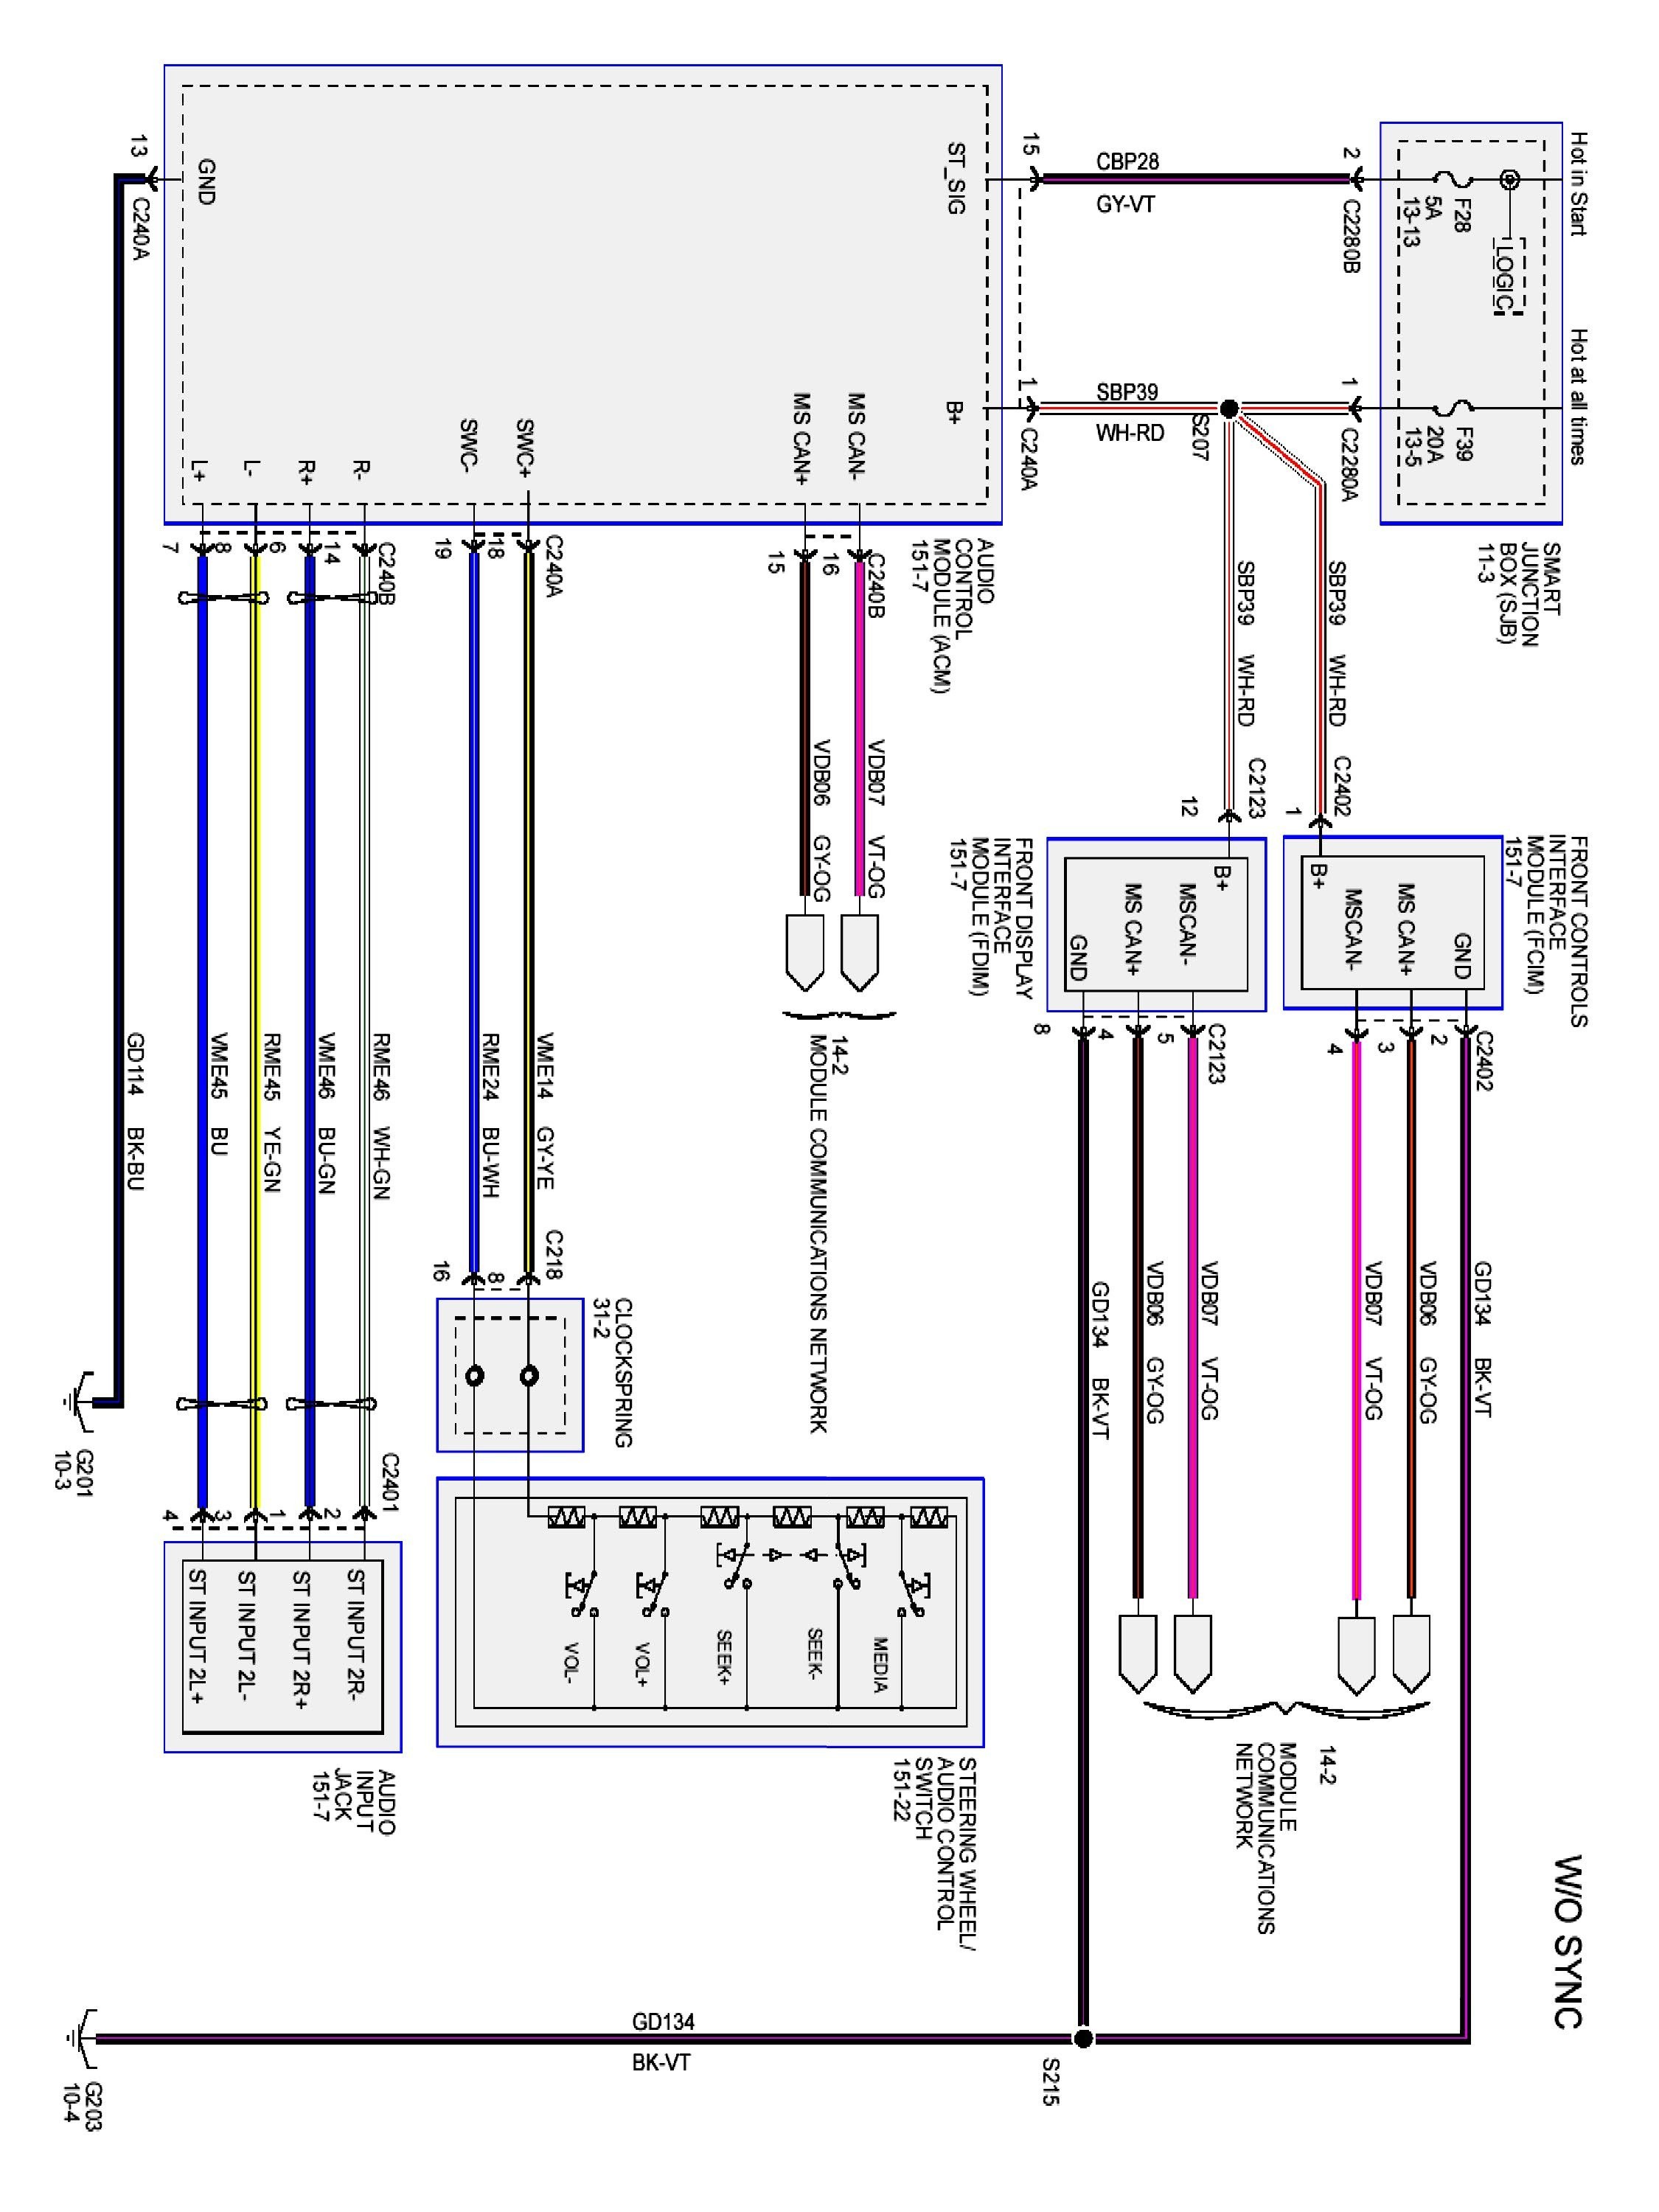 2003 Ford Focus Radio Wiring Diagram Floralfrocks And autoctono